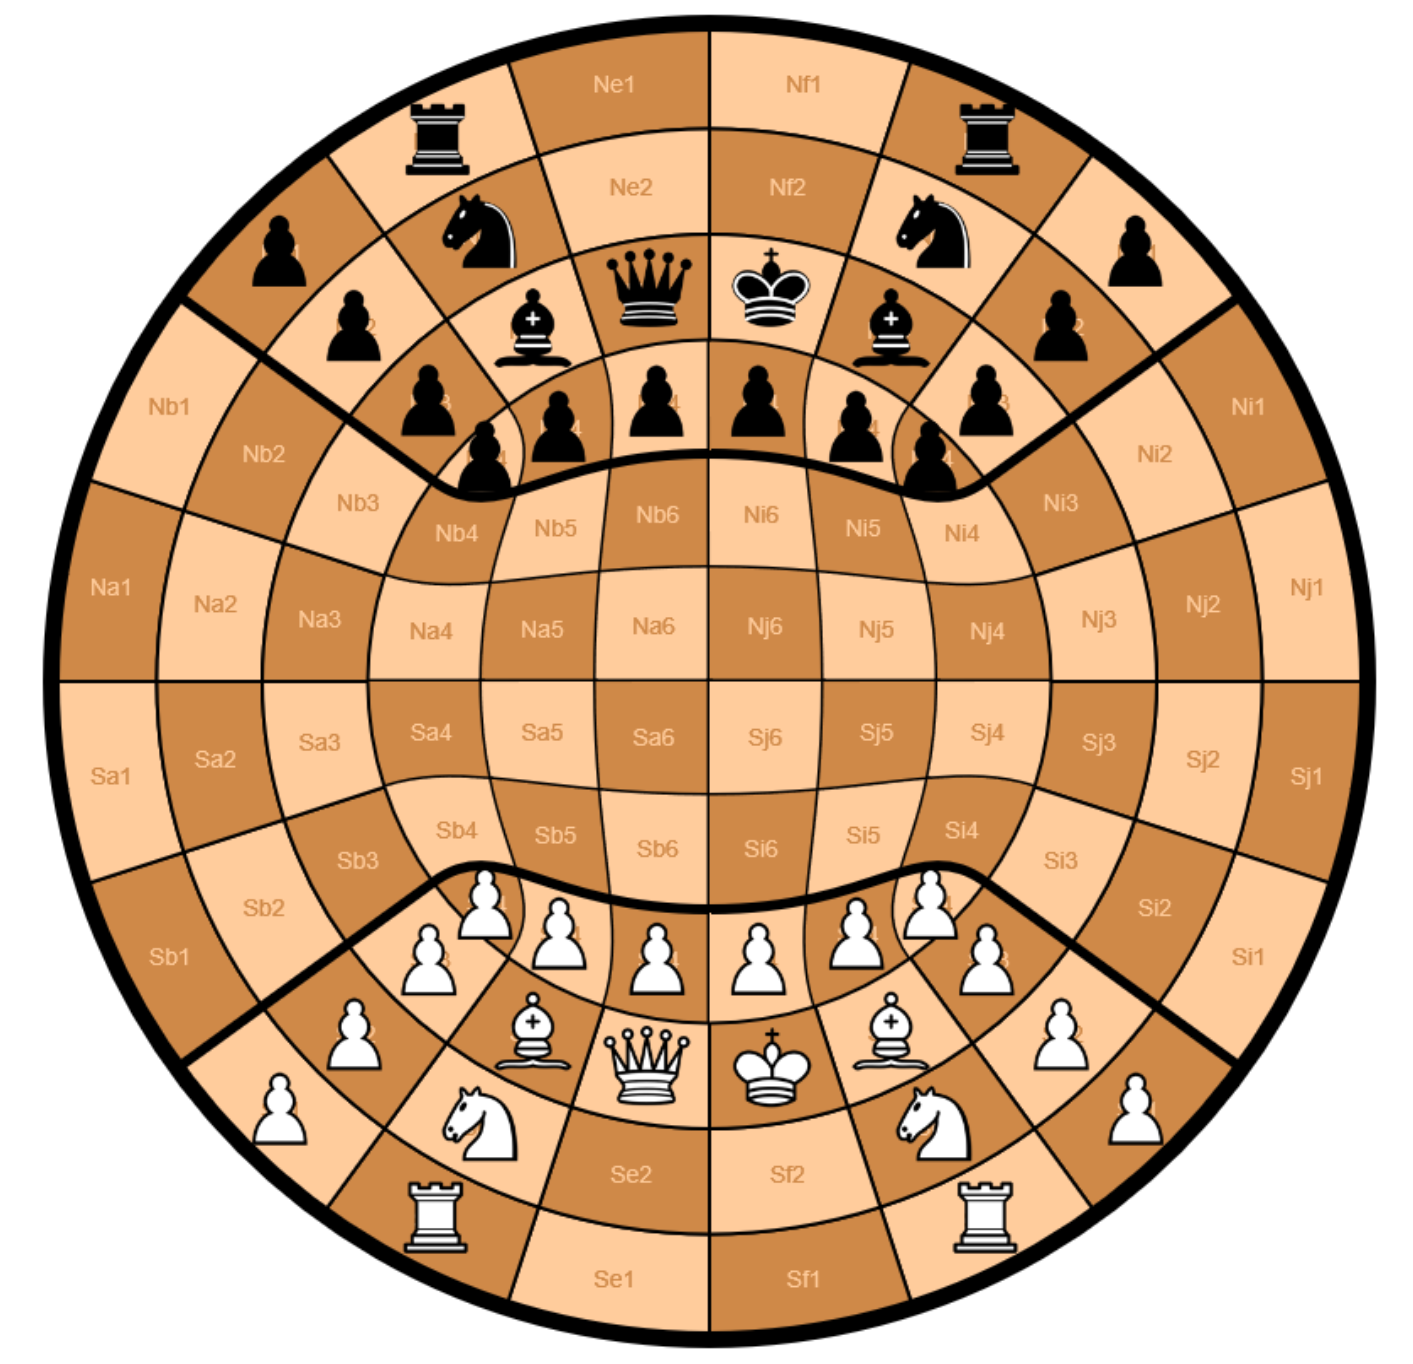 Introduction to Circular Chess (Chess Variant) - PPQTY